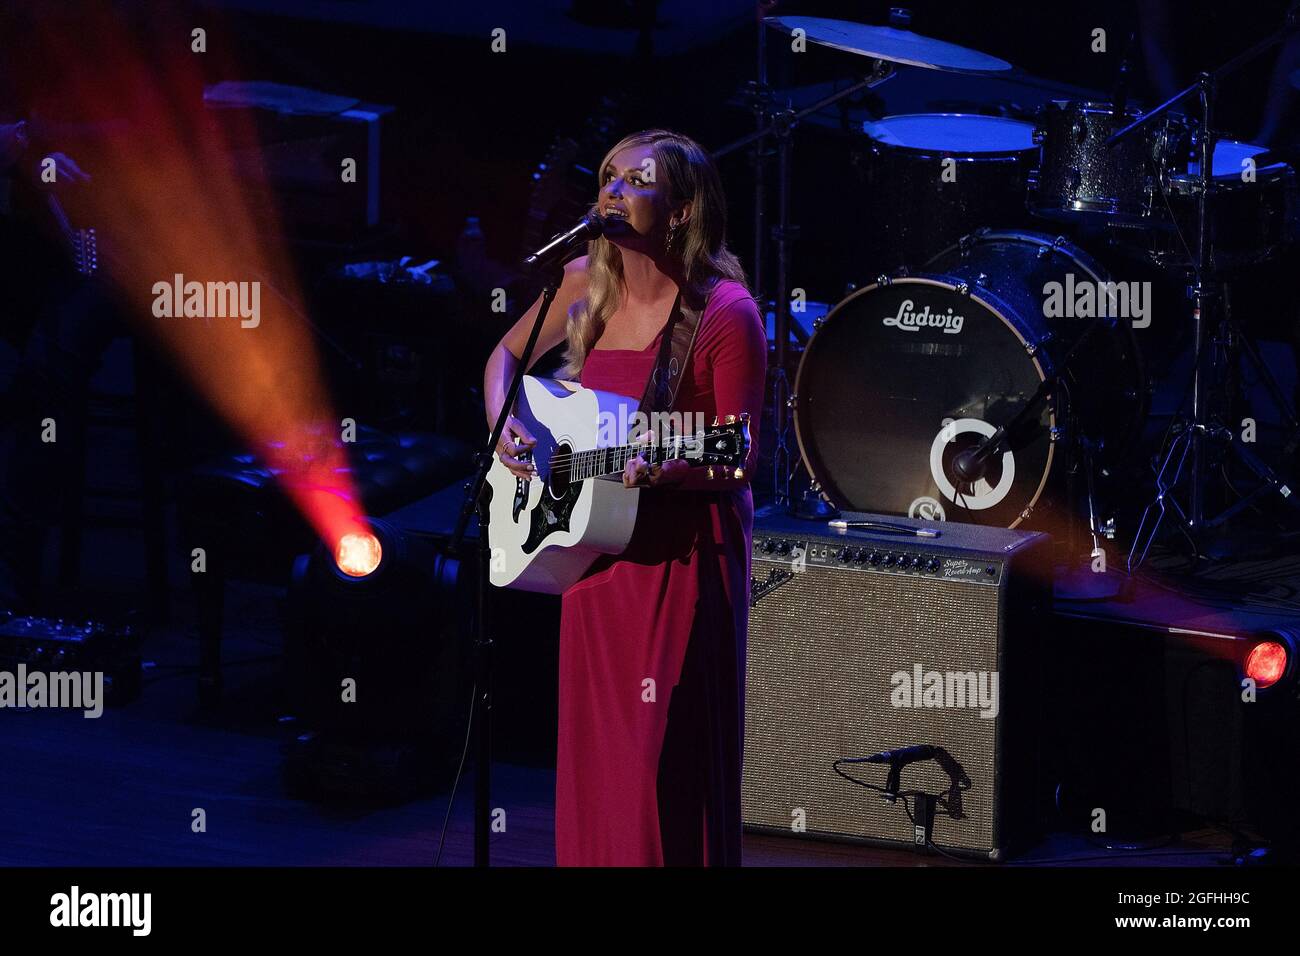 Carly Pearce performs at the 14th Annual ACM Honors at Ryman Auditorium on Wednesday, Aug. 25, 2021, in Nashville, Tenn. Photo: imageSPACE/MediaPunch Stock Photo